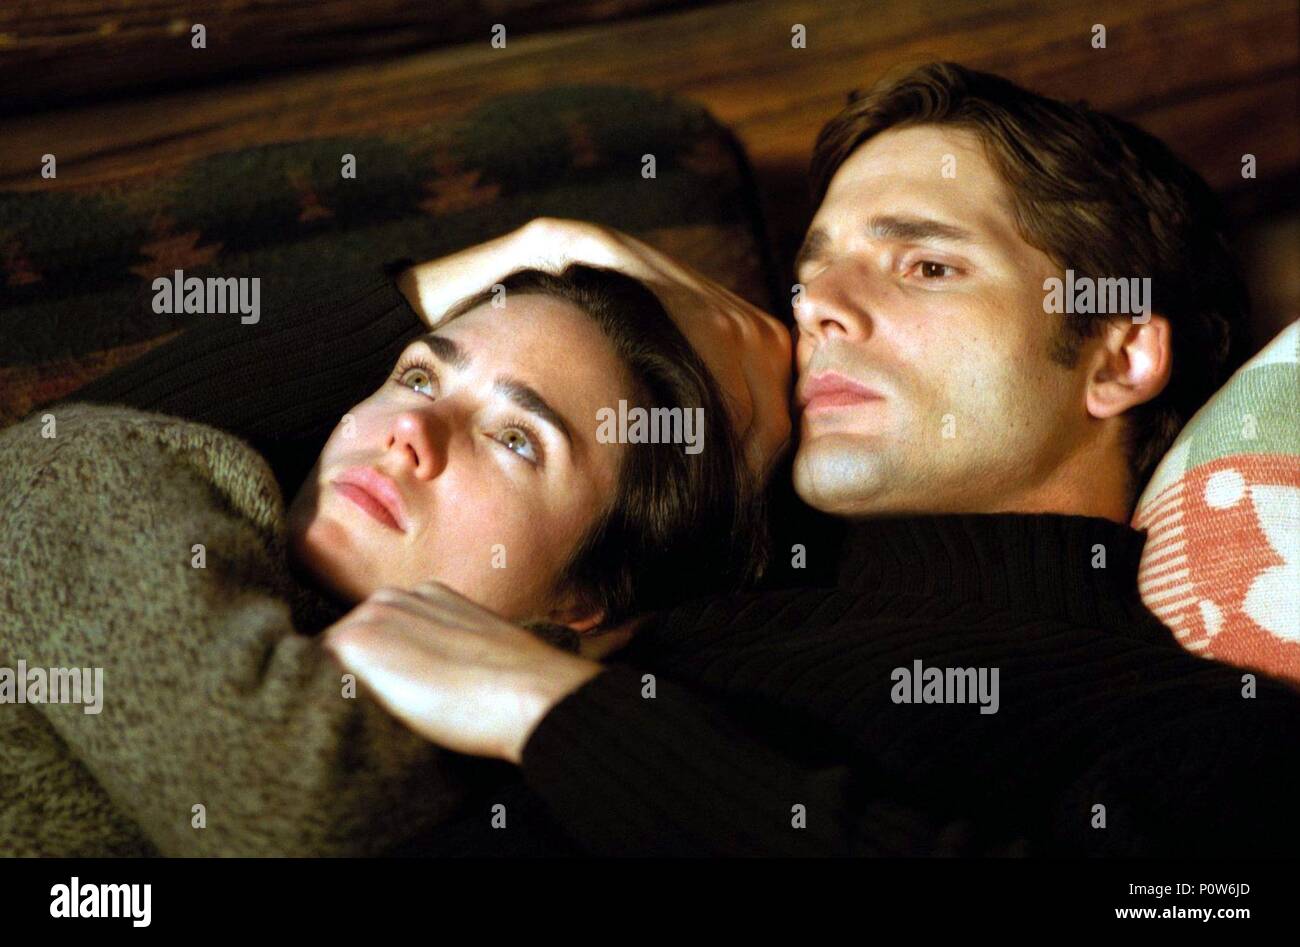 Original Film Title: ANN.  English Title: ANN.  Film Director: ANG LEE.  Year: 2003.  Stars: JENNIFER CONNELLY; ERIC BANA. Credit: UNIVERSAL PICTURES / Album Stock Photo